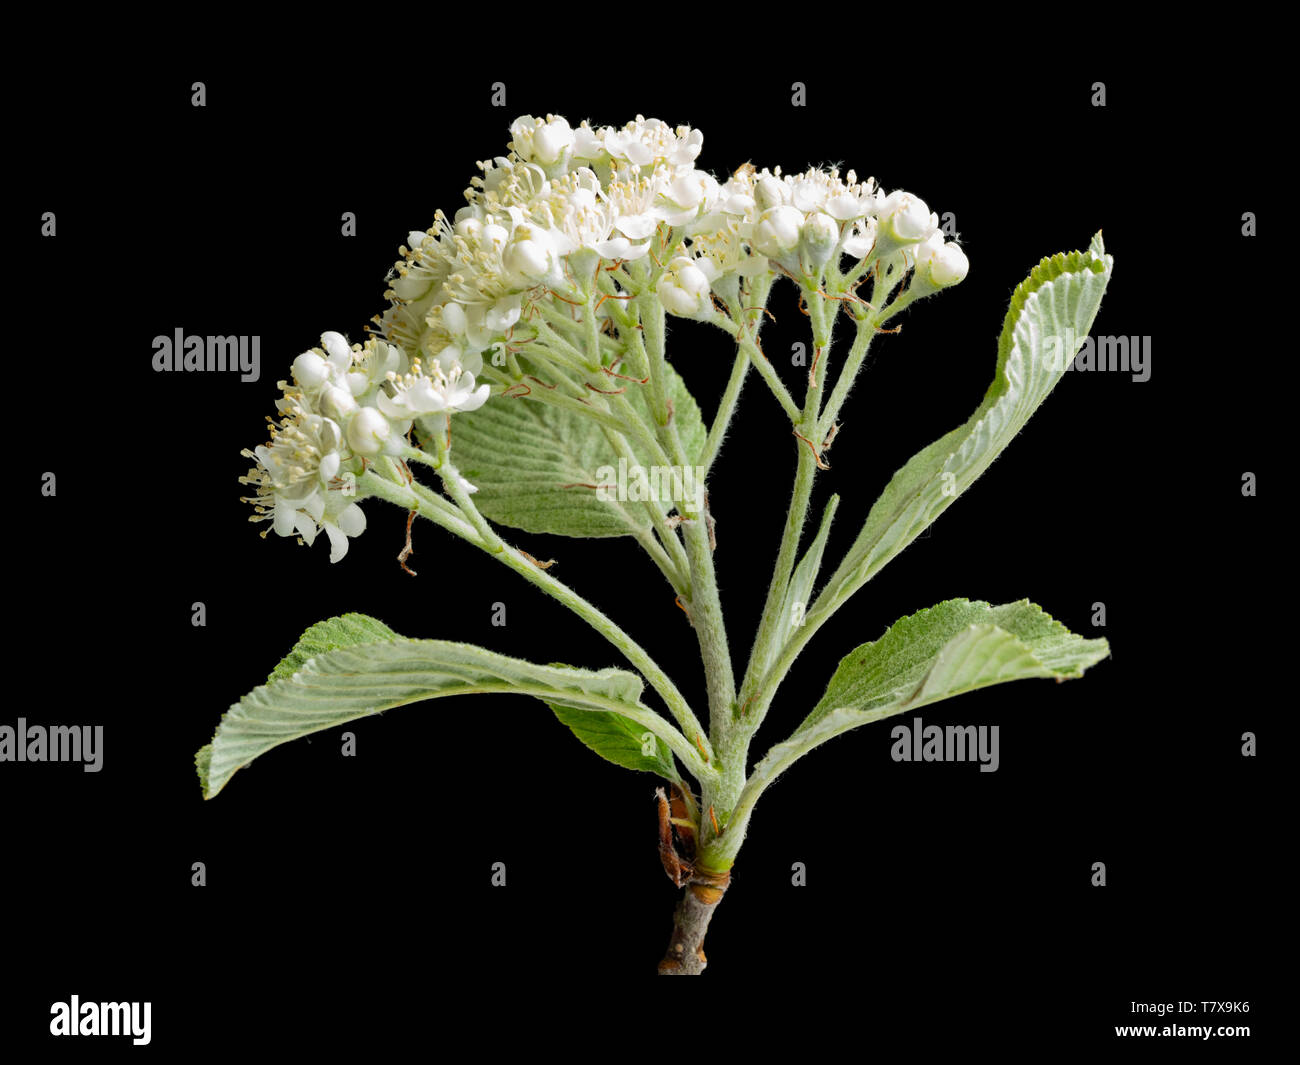 Silvery spring foliage and creamy flowers of the hardy whitebeam tree, Sorbus aria 'Lutescens', on a black background Stock Photo